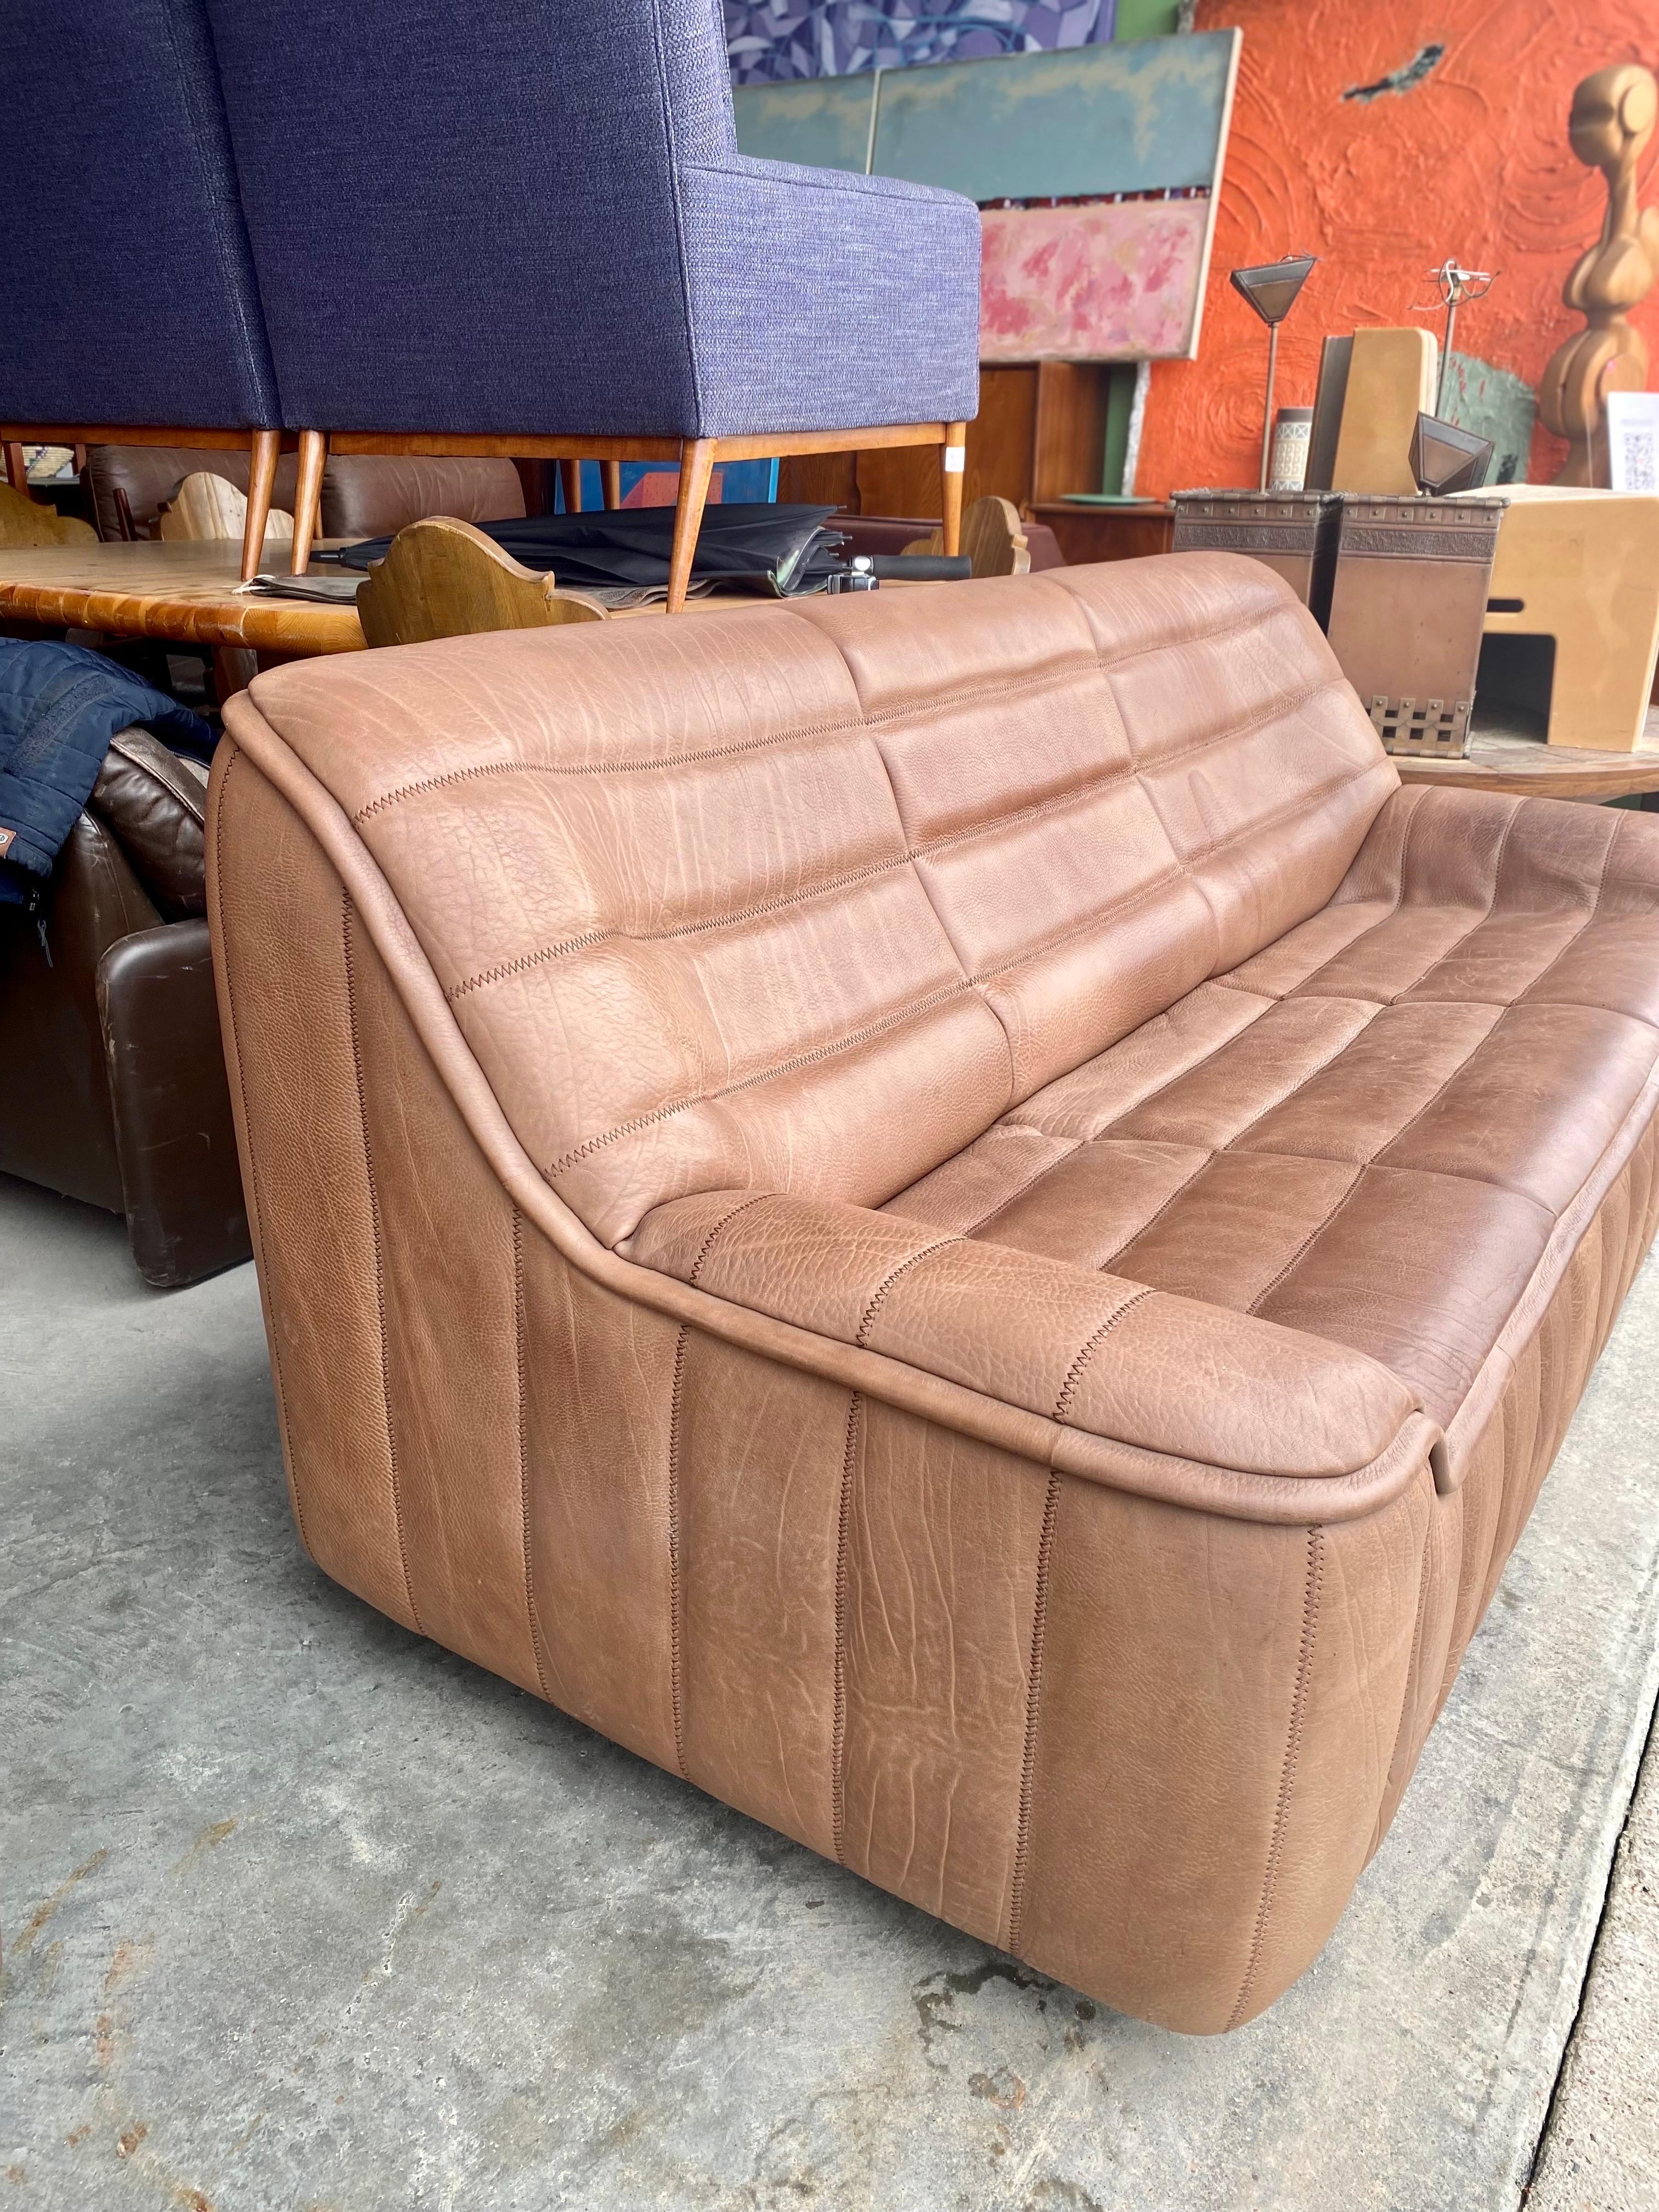 Beautiful De Sede leather loveseat sofa DS 84 made of Buffalo is in great overall condition, Switzerland, circa 1970s.

Dimensions: 73